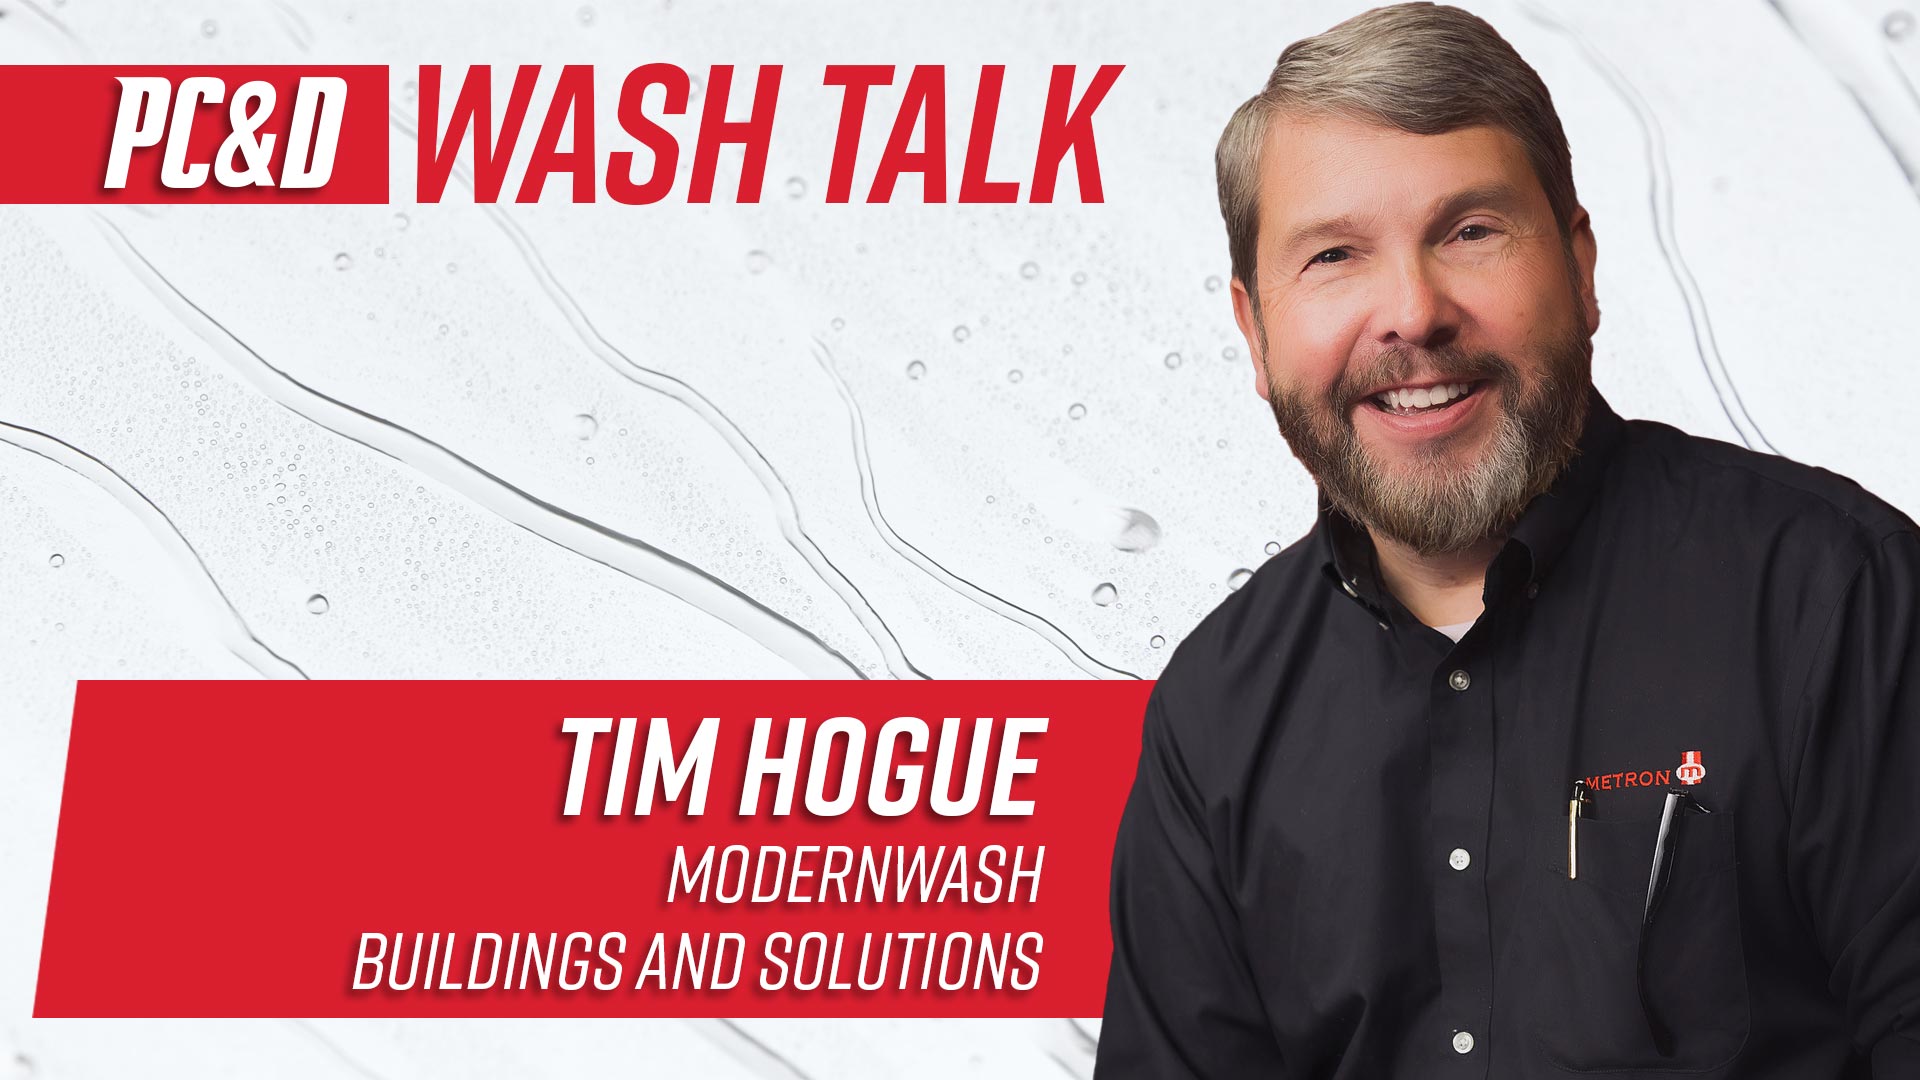 Tim Hogue, CEO of Modernwash Buildings and Solutions